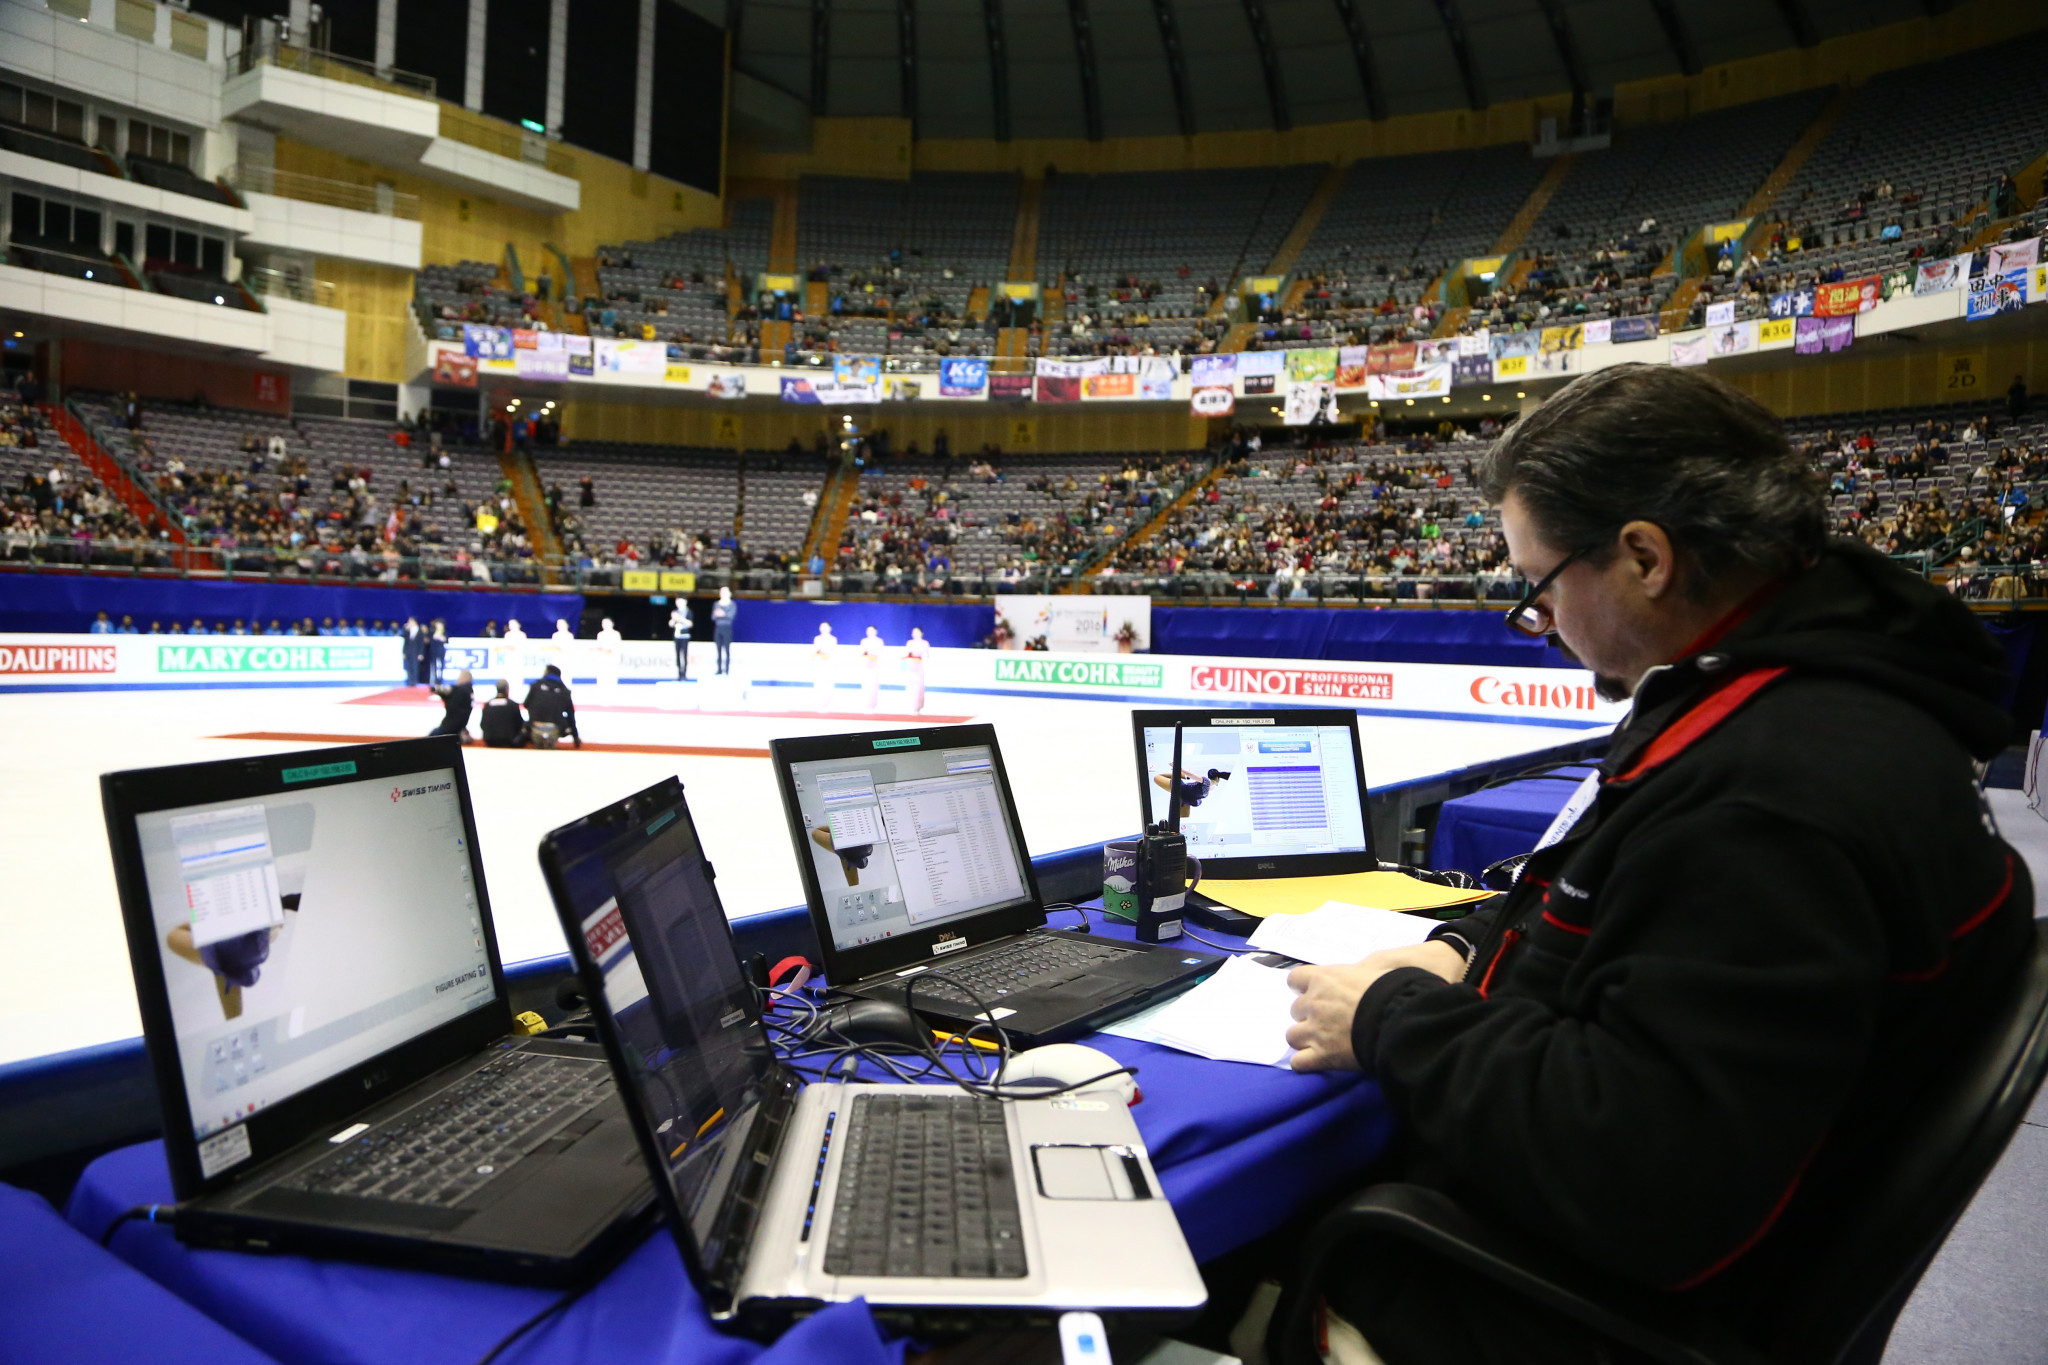 The virtual judging system was discussed during September's Figure Skating Marketing Summit ©CTSU